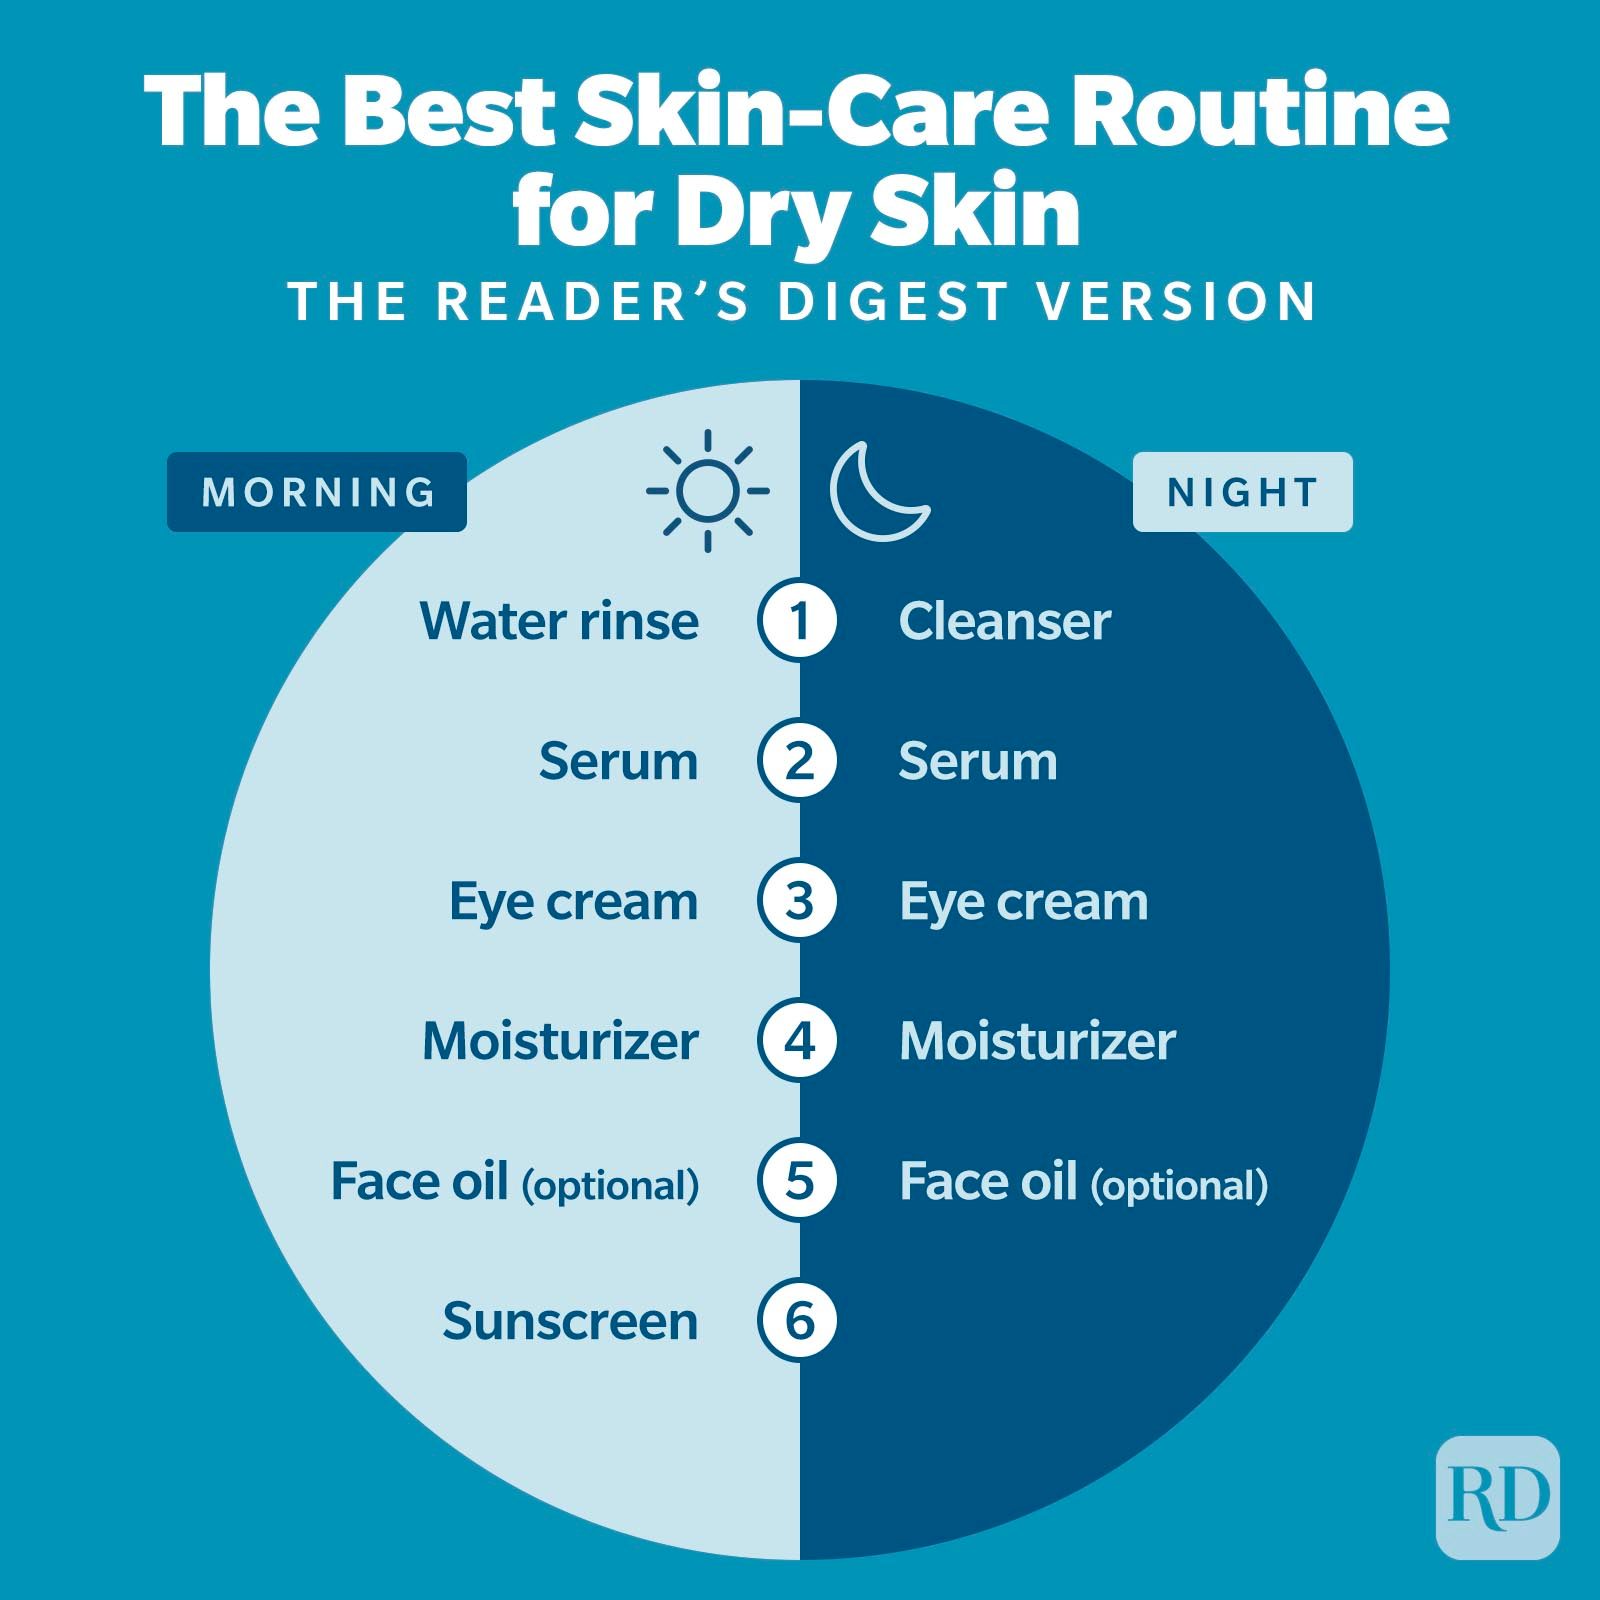 The Best Skin-Care Routine for Dry Skin